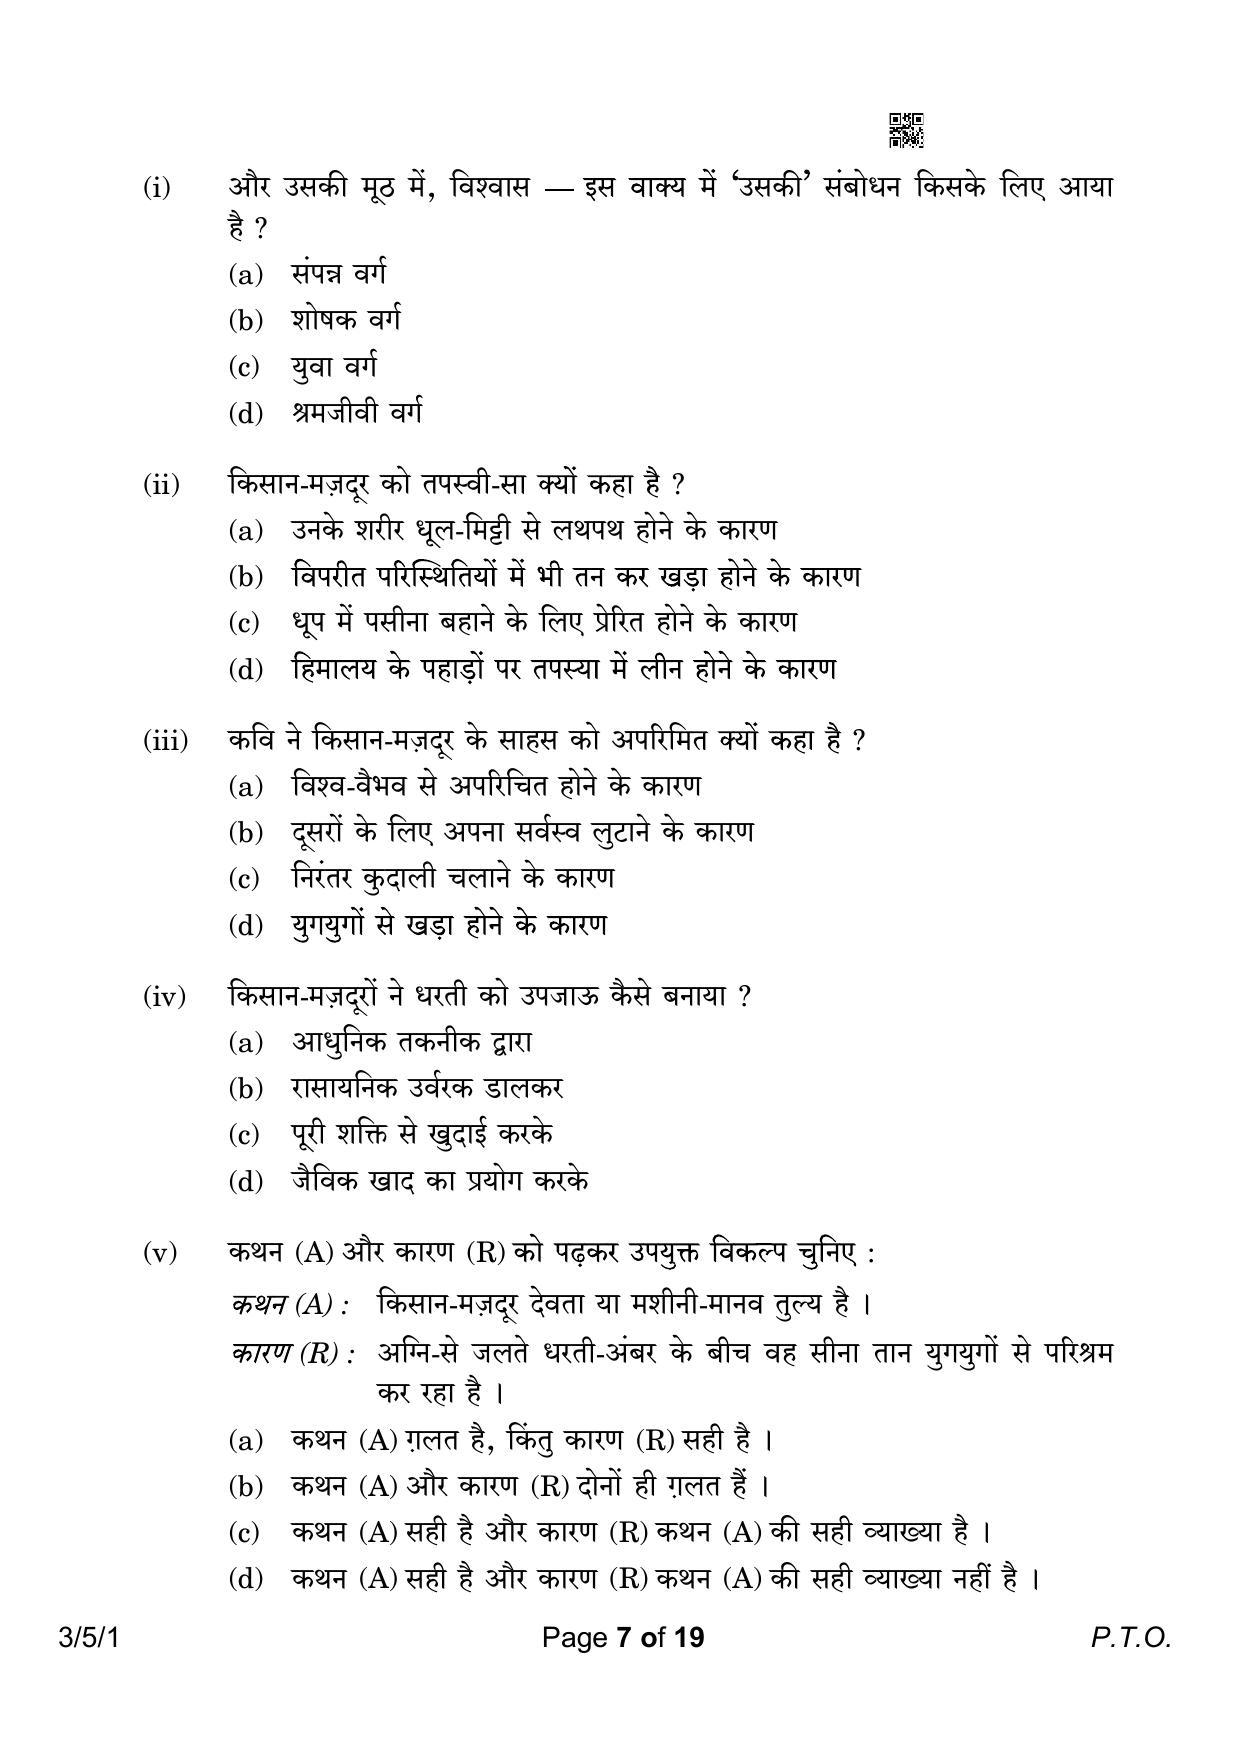 CBSE Class 10 3-5-1 Hindi A 2023 Question Paper - Page 7